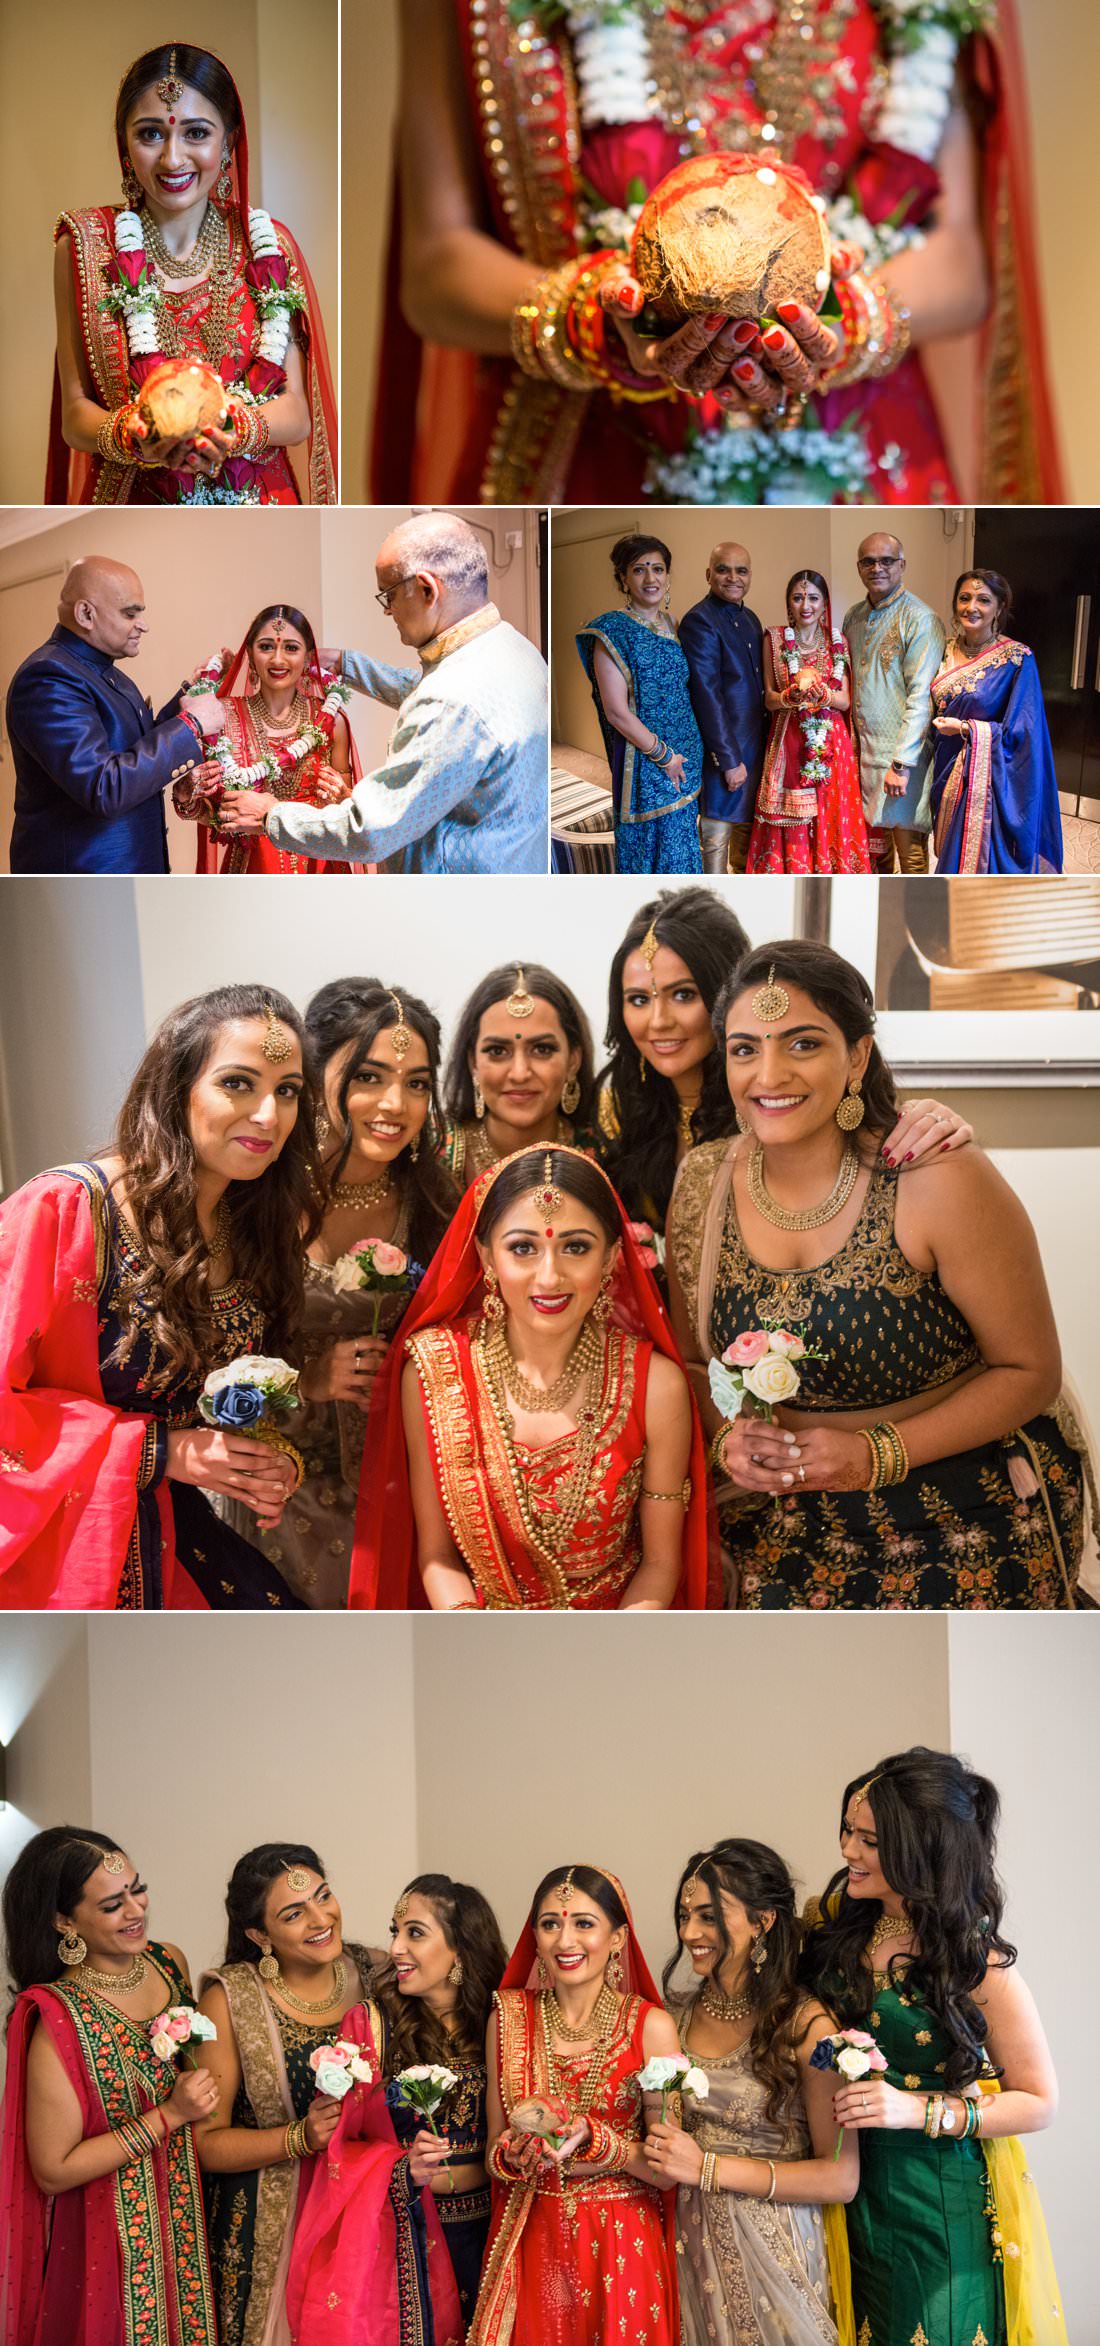 Indian wedding photography at Belfry Hotel Hiren Mica 6